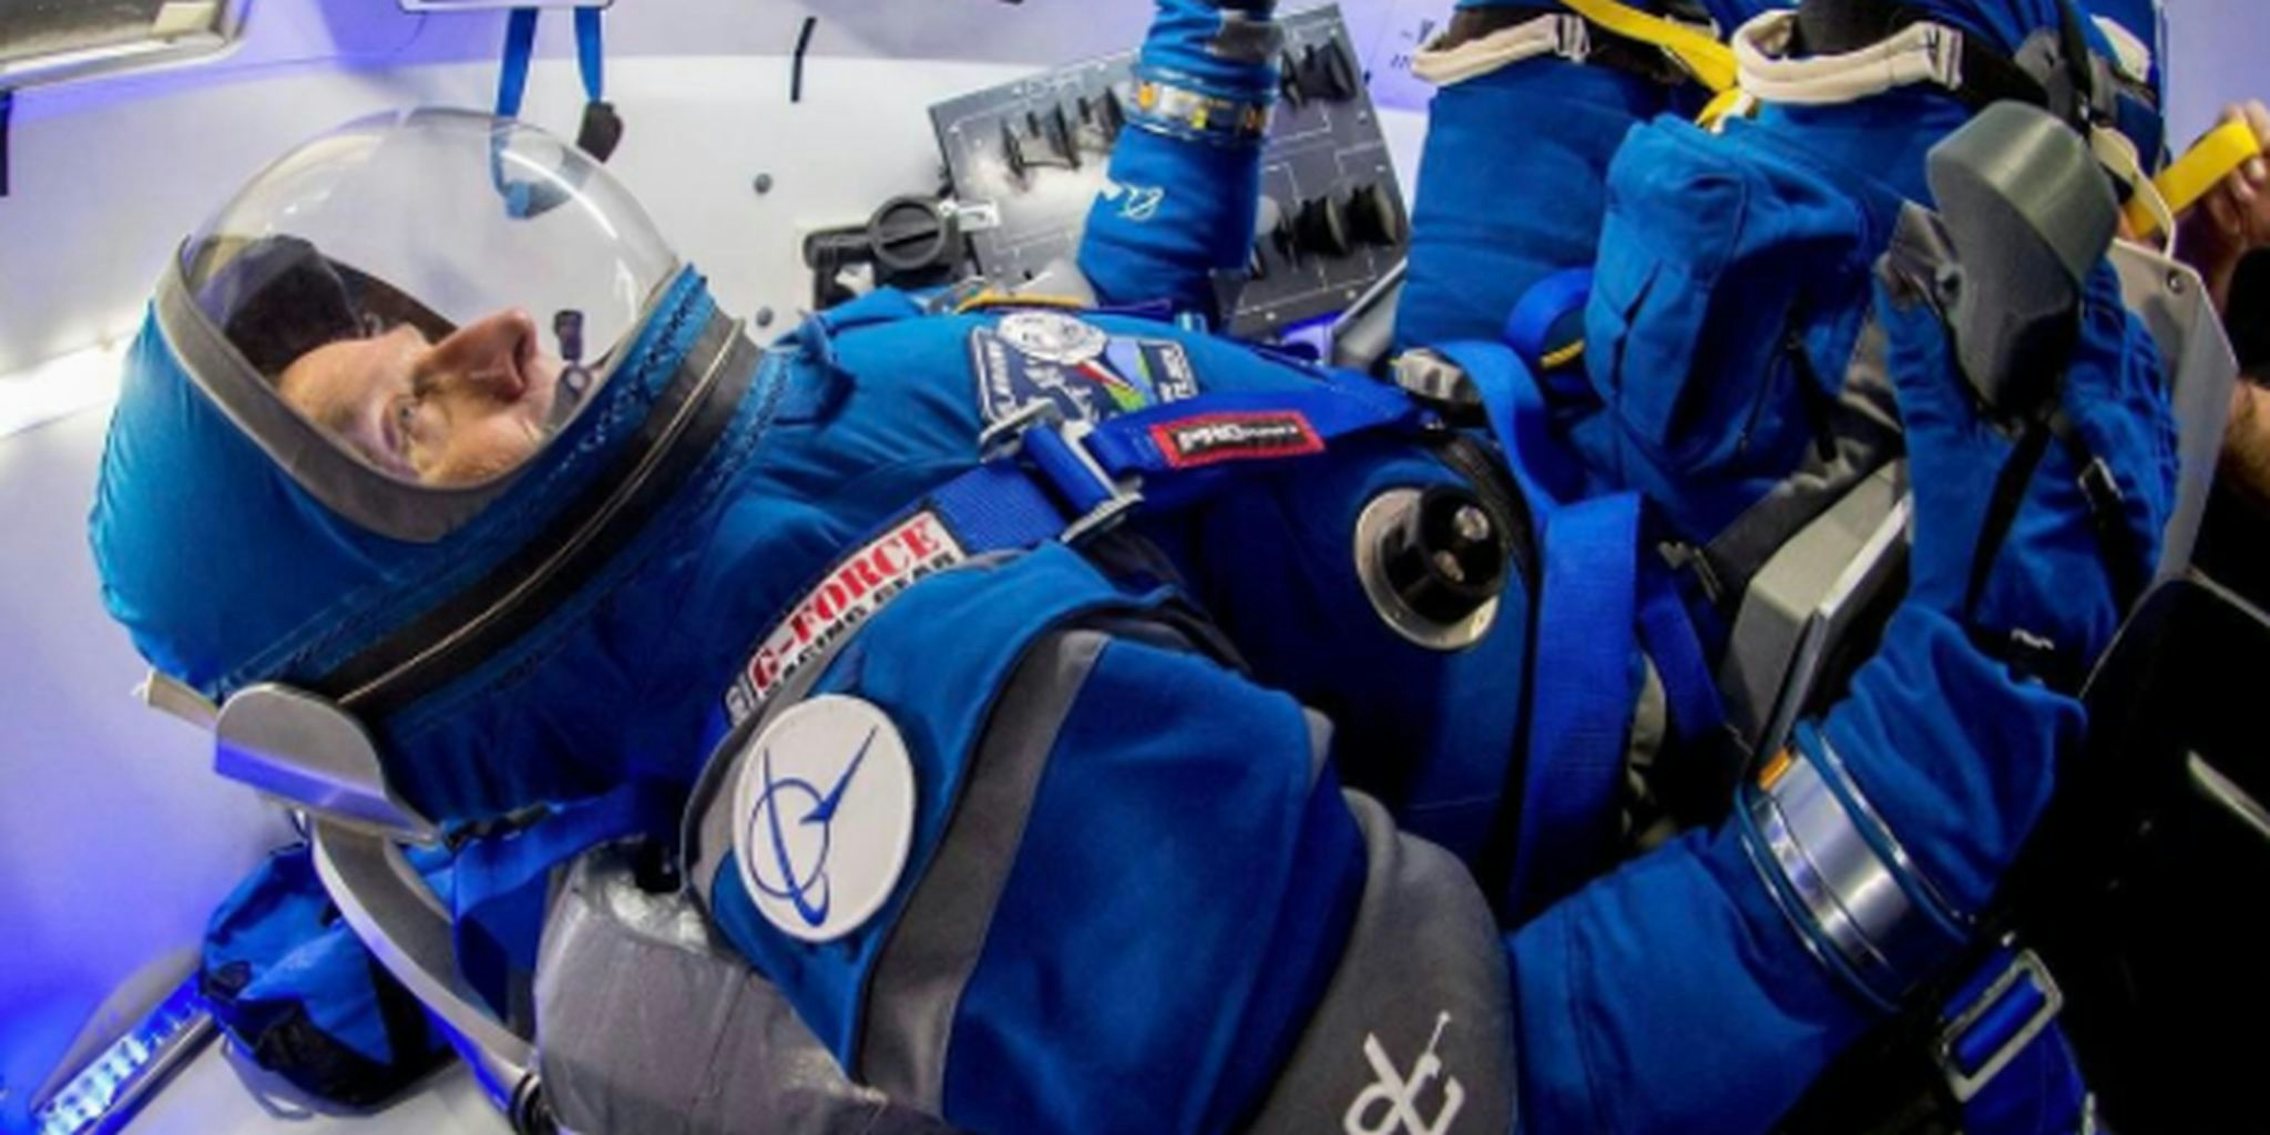 Boeing's New Space Suit Designs Are Straight Out of the Movies